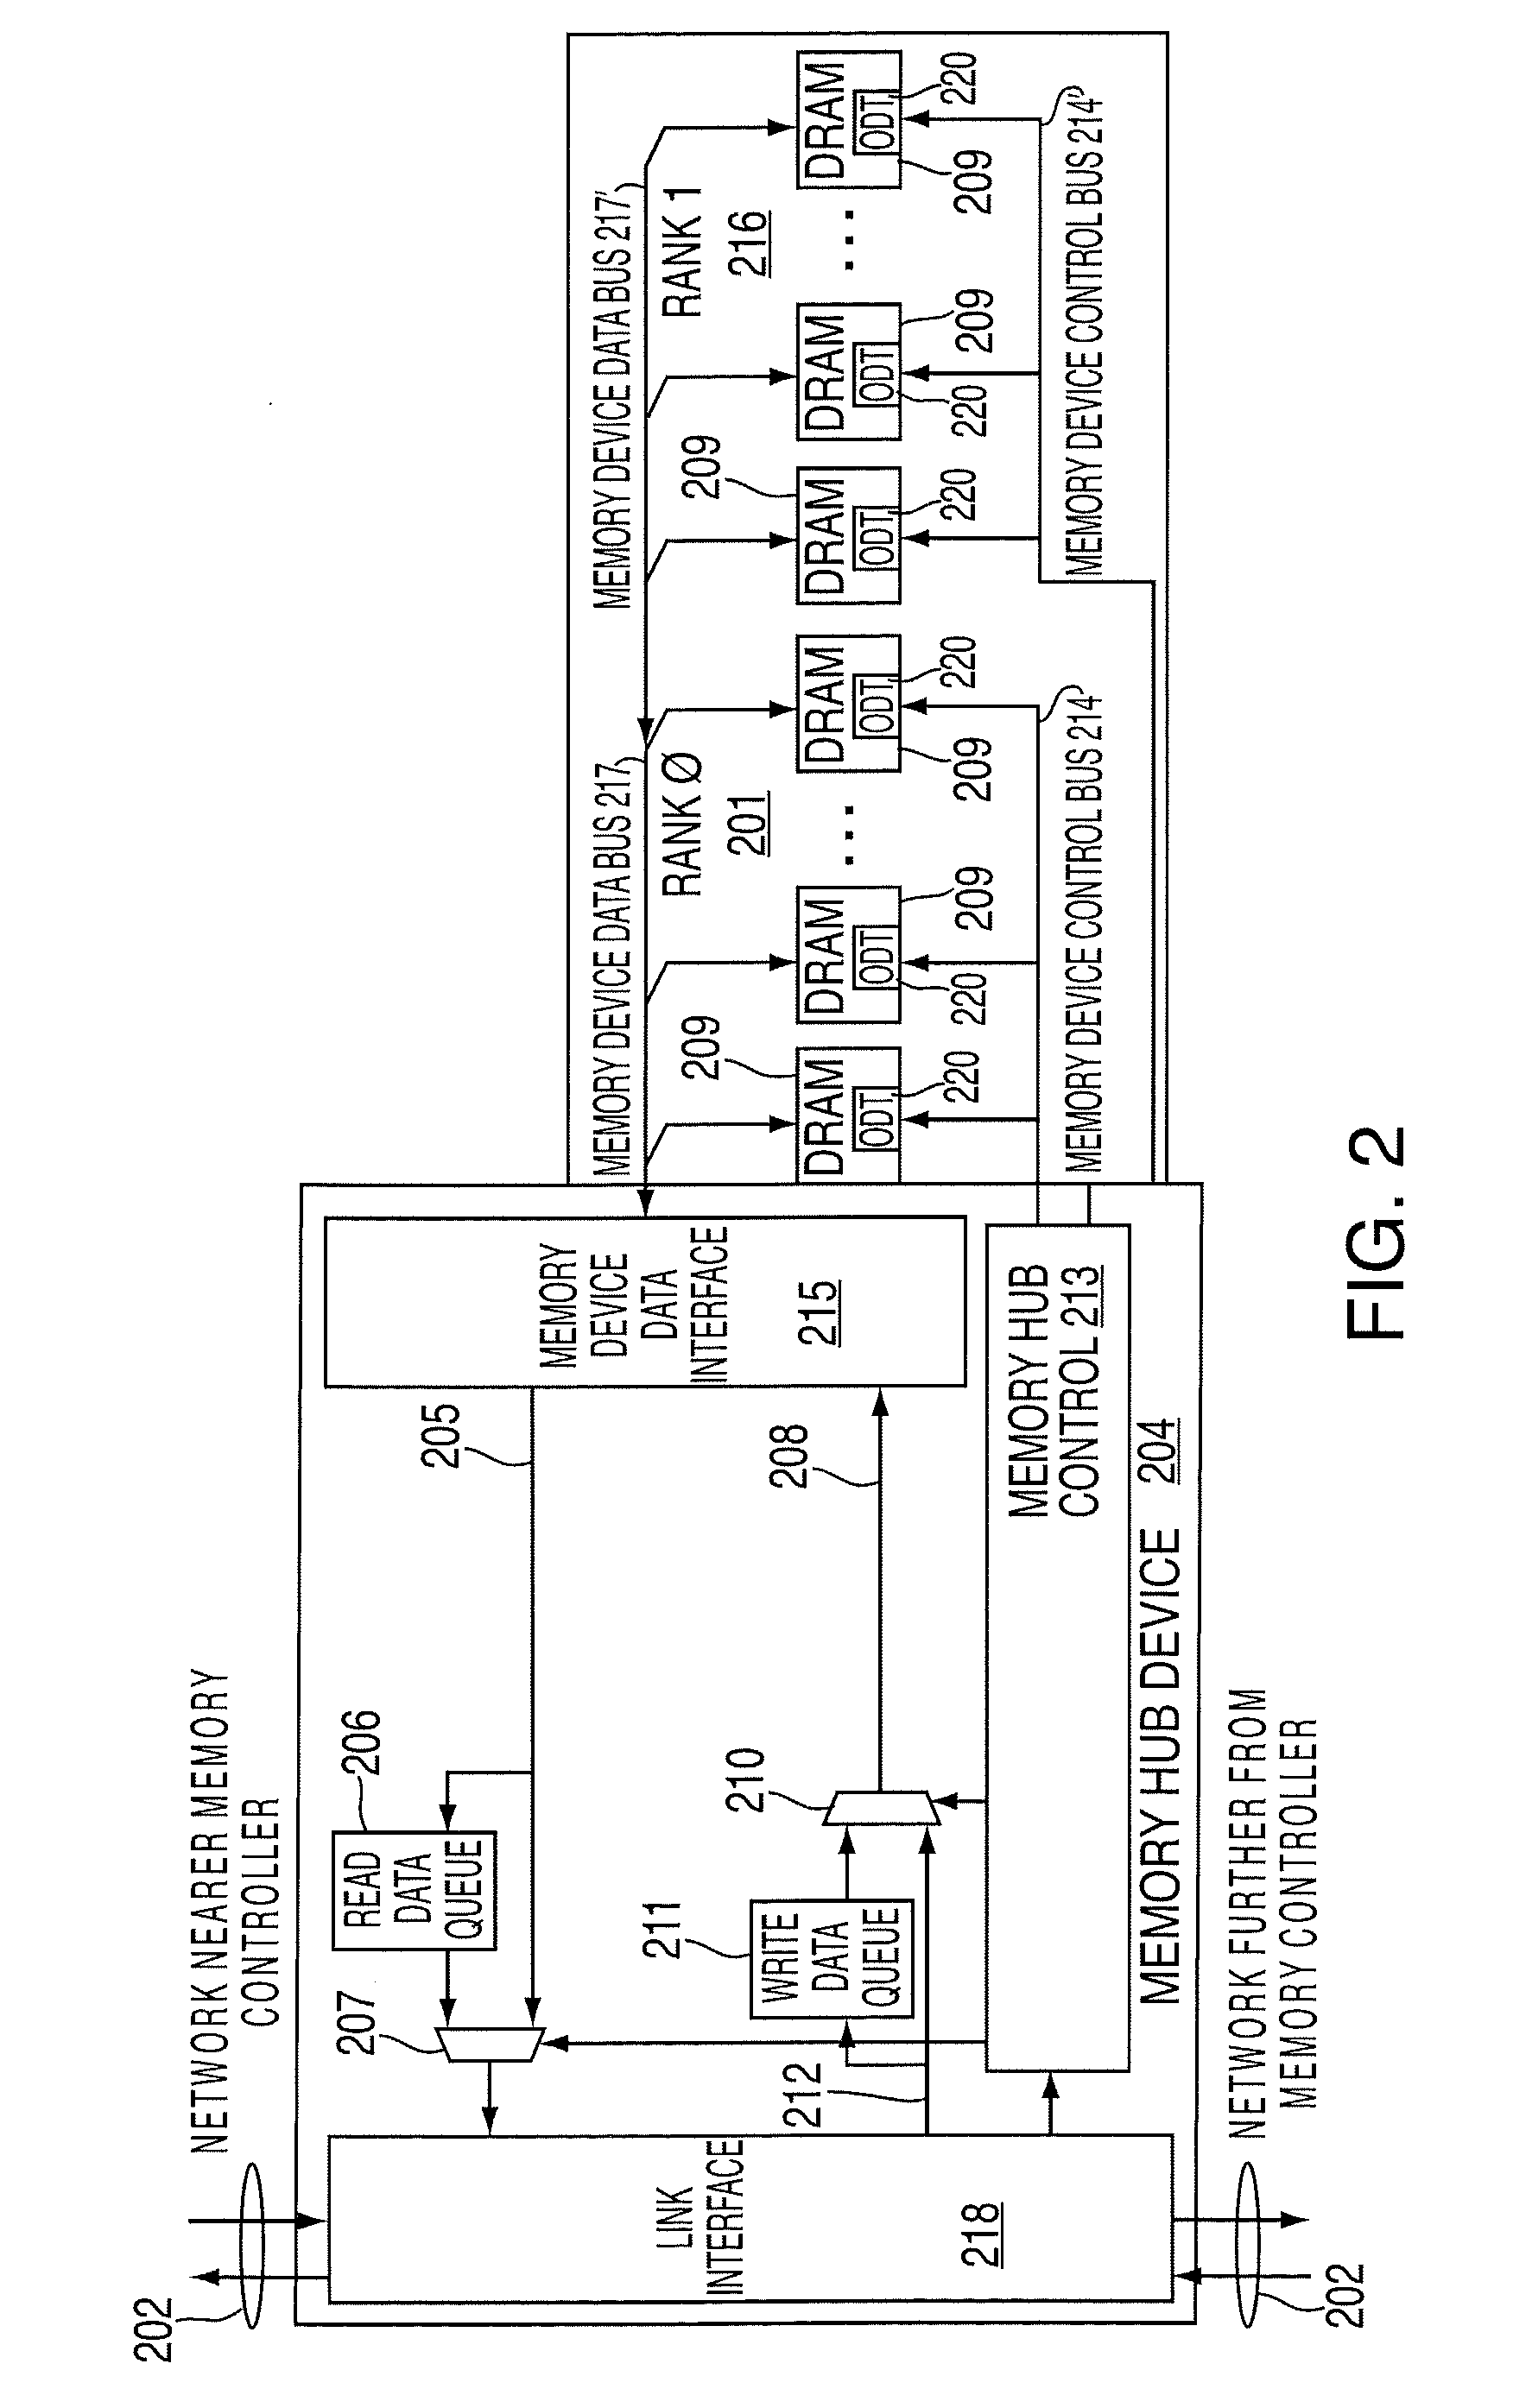 System for providing on-die termination of a control signal bus